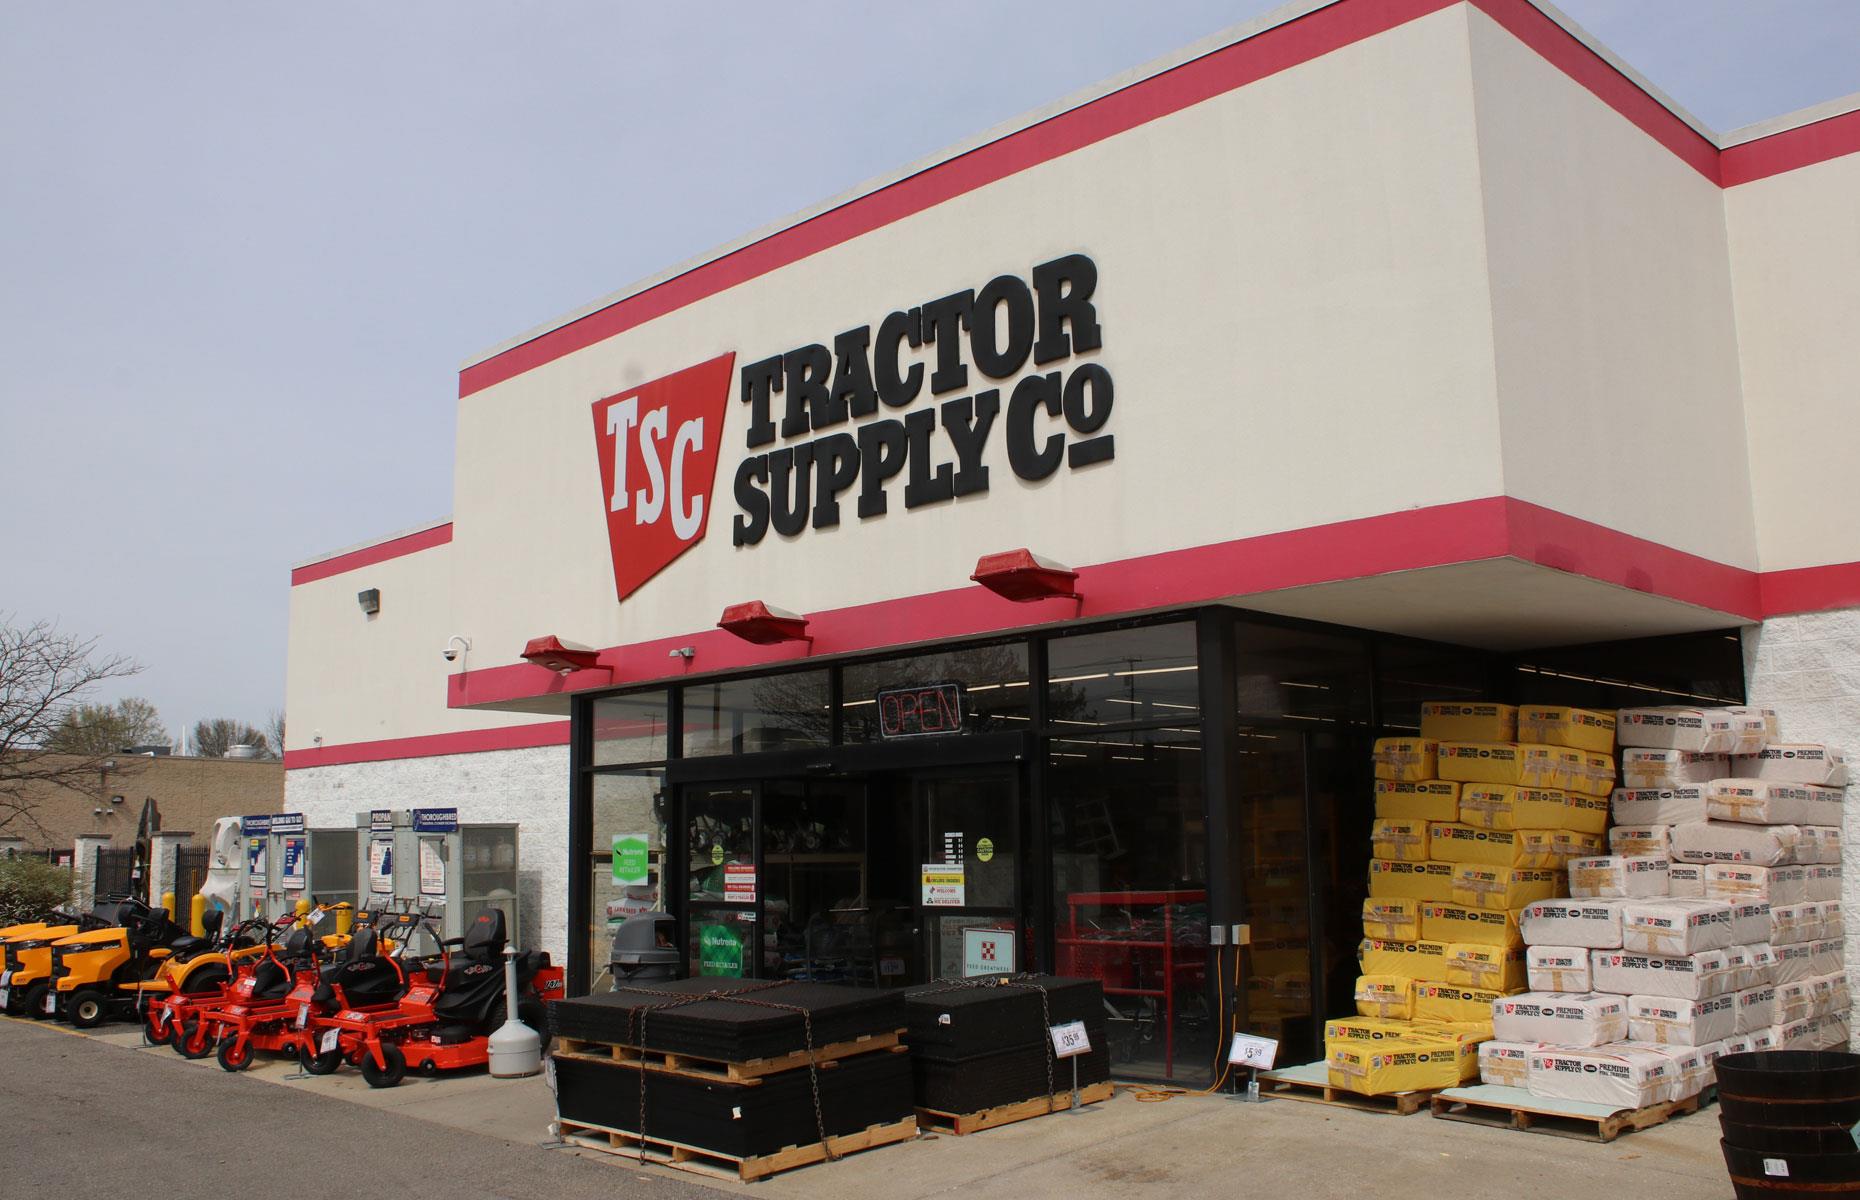 2000 – Tractor Supply Company: $1,000 invested then is worth $259,276 (£196k) today